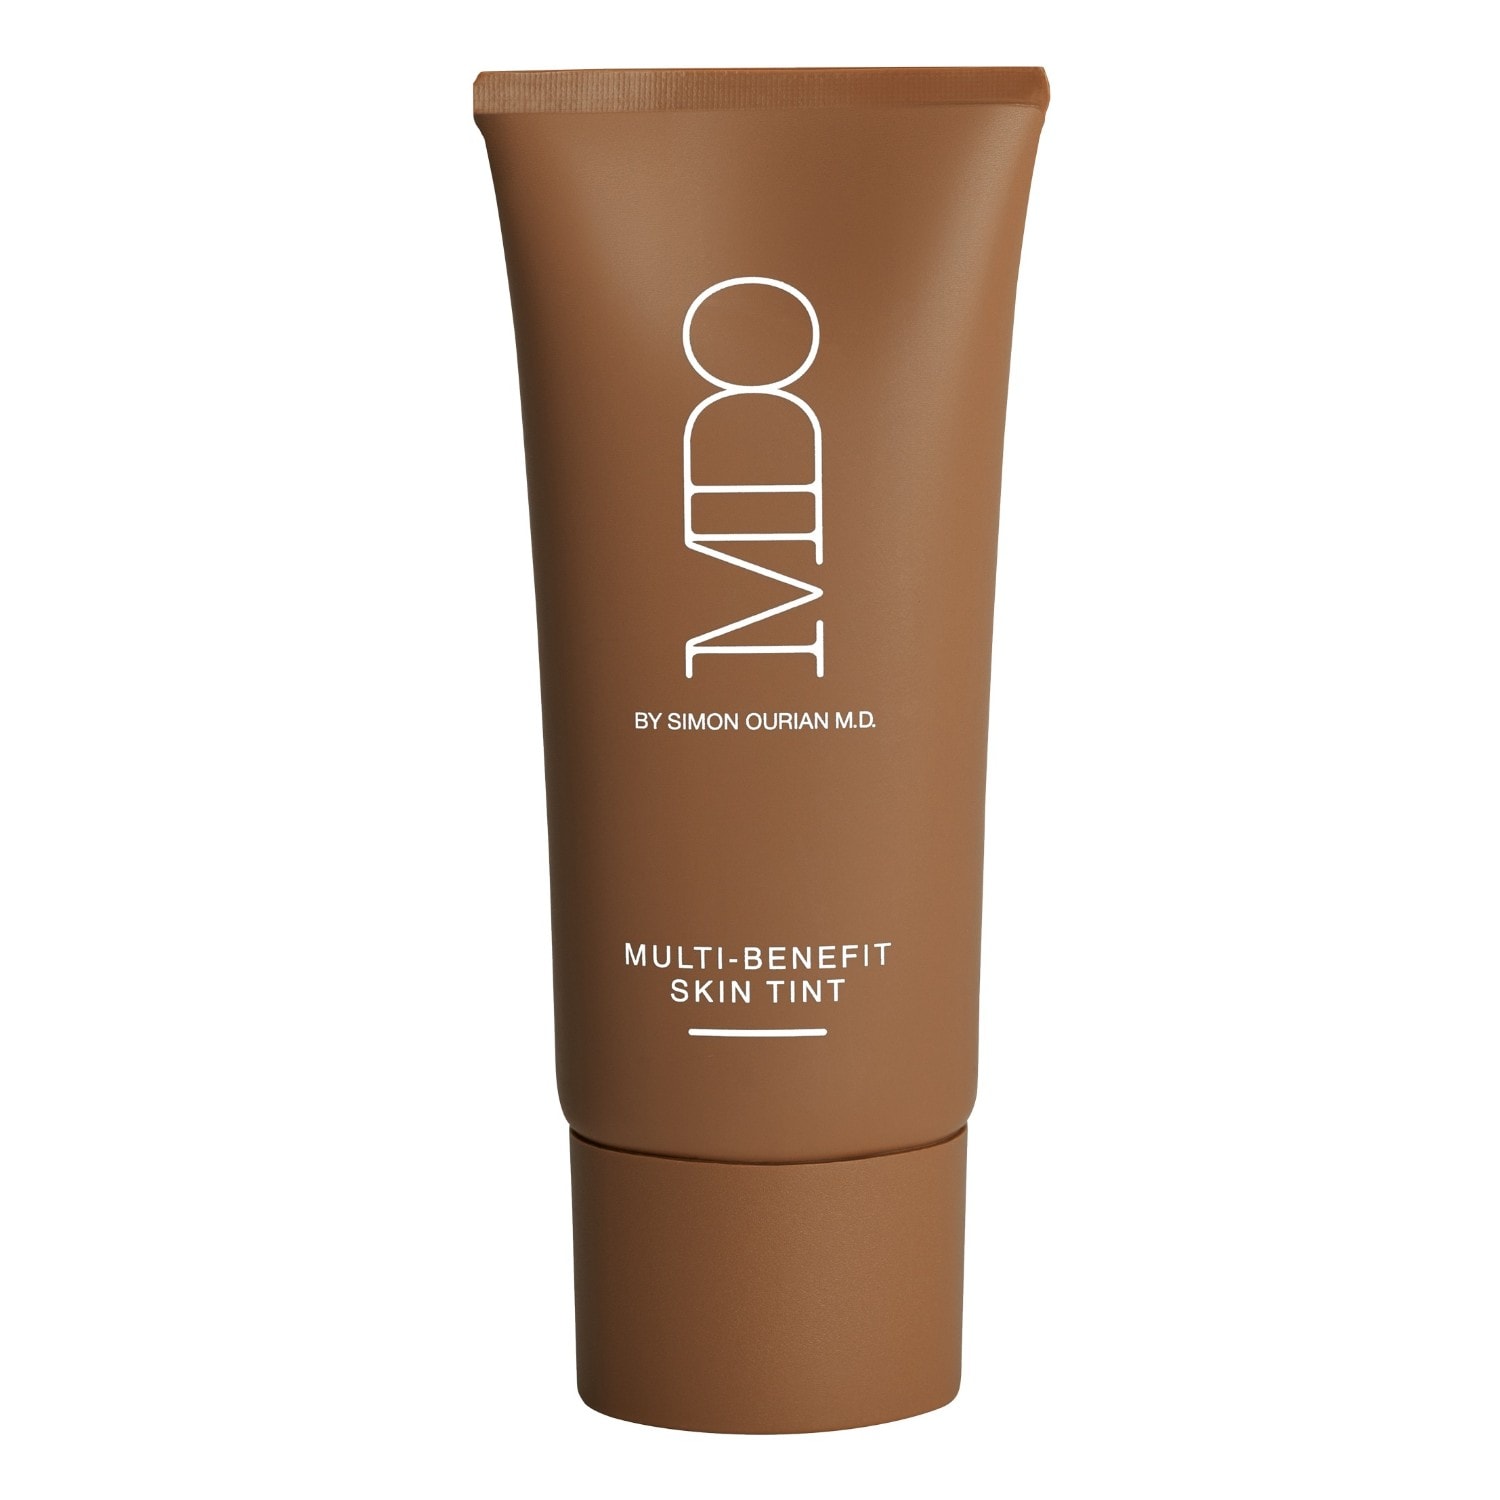 MDO by Simon Ourian M.D. Multi-Benefit Skin Tint, Dark to Deep